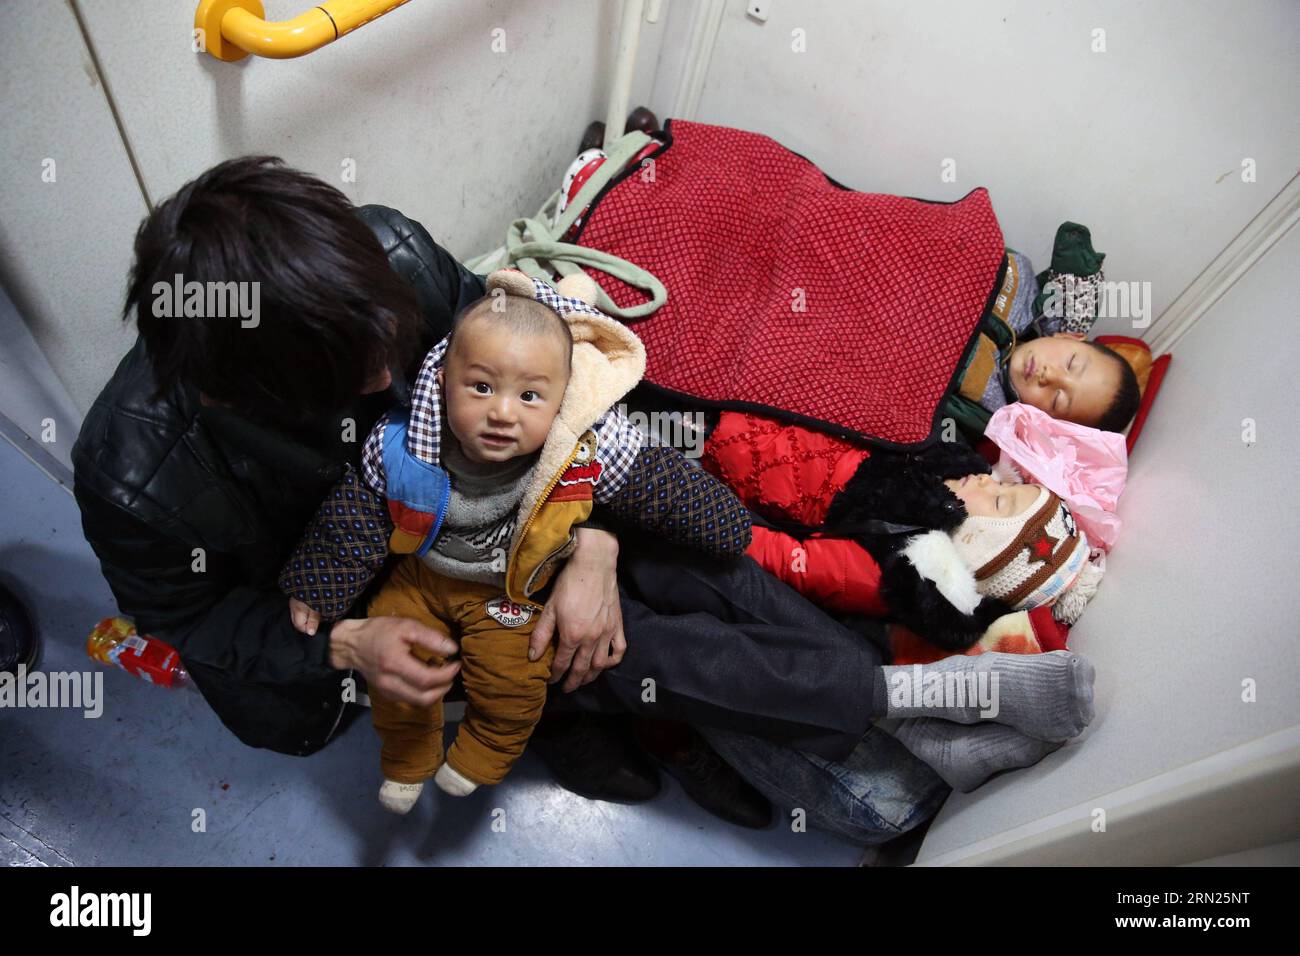 Children have a sleep on the ground of train 3663, which runs from east China s Shanghai to Chengdu, capital of southwest China s Sichuan Province, on Sept. 9, 2015. The Spring Festival, or the Chinese lunar New Year which starts from Feb. 19 this year, is known as the world s biggest migration, with millions of people traveling vast distances for family reunions. Ding Ting) (lfj) CHINA-SPRING FESTIVAL-HOME RETURNING (CN) PeixXin PUBLICATIONxNOTxINxCHN   Children have a Sleep ON The Ground of Train 3663 Which runs from East China S Shanghai to Chengdu Capital of Southwest China S Sichuan Provi Stock Photo